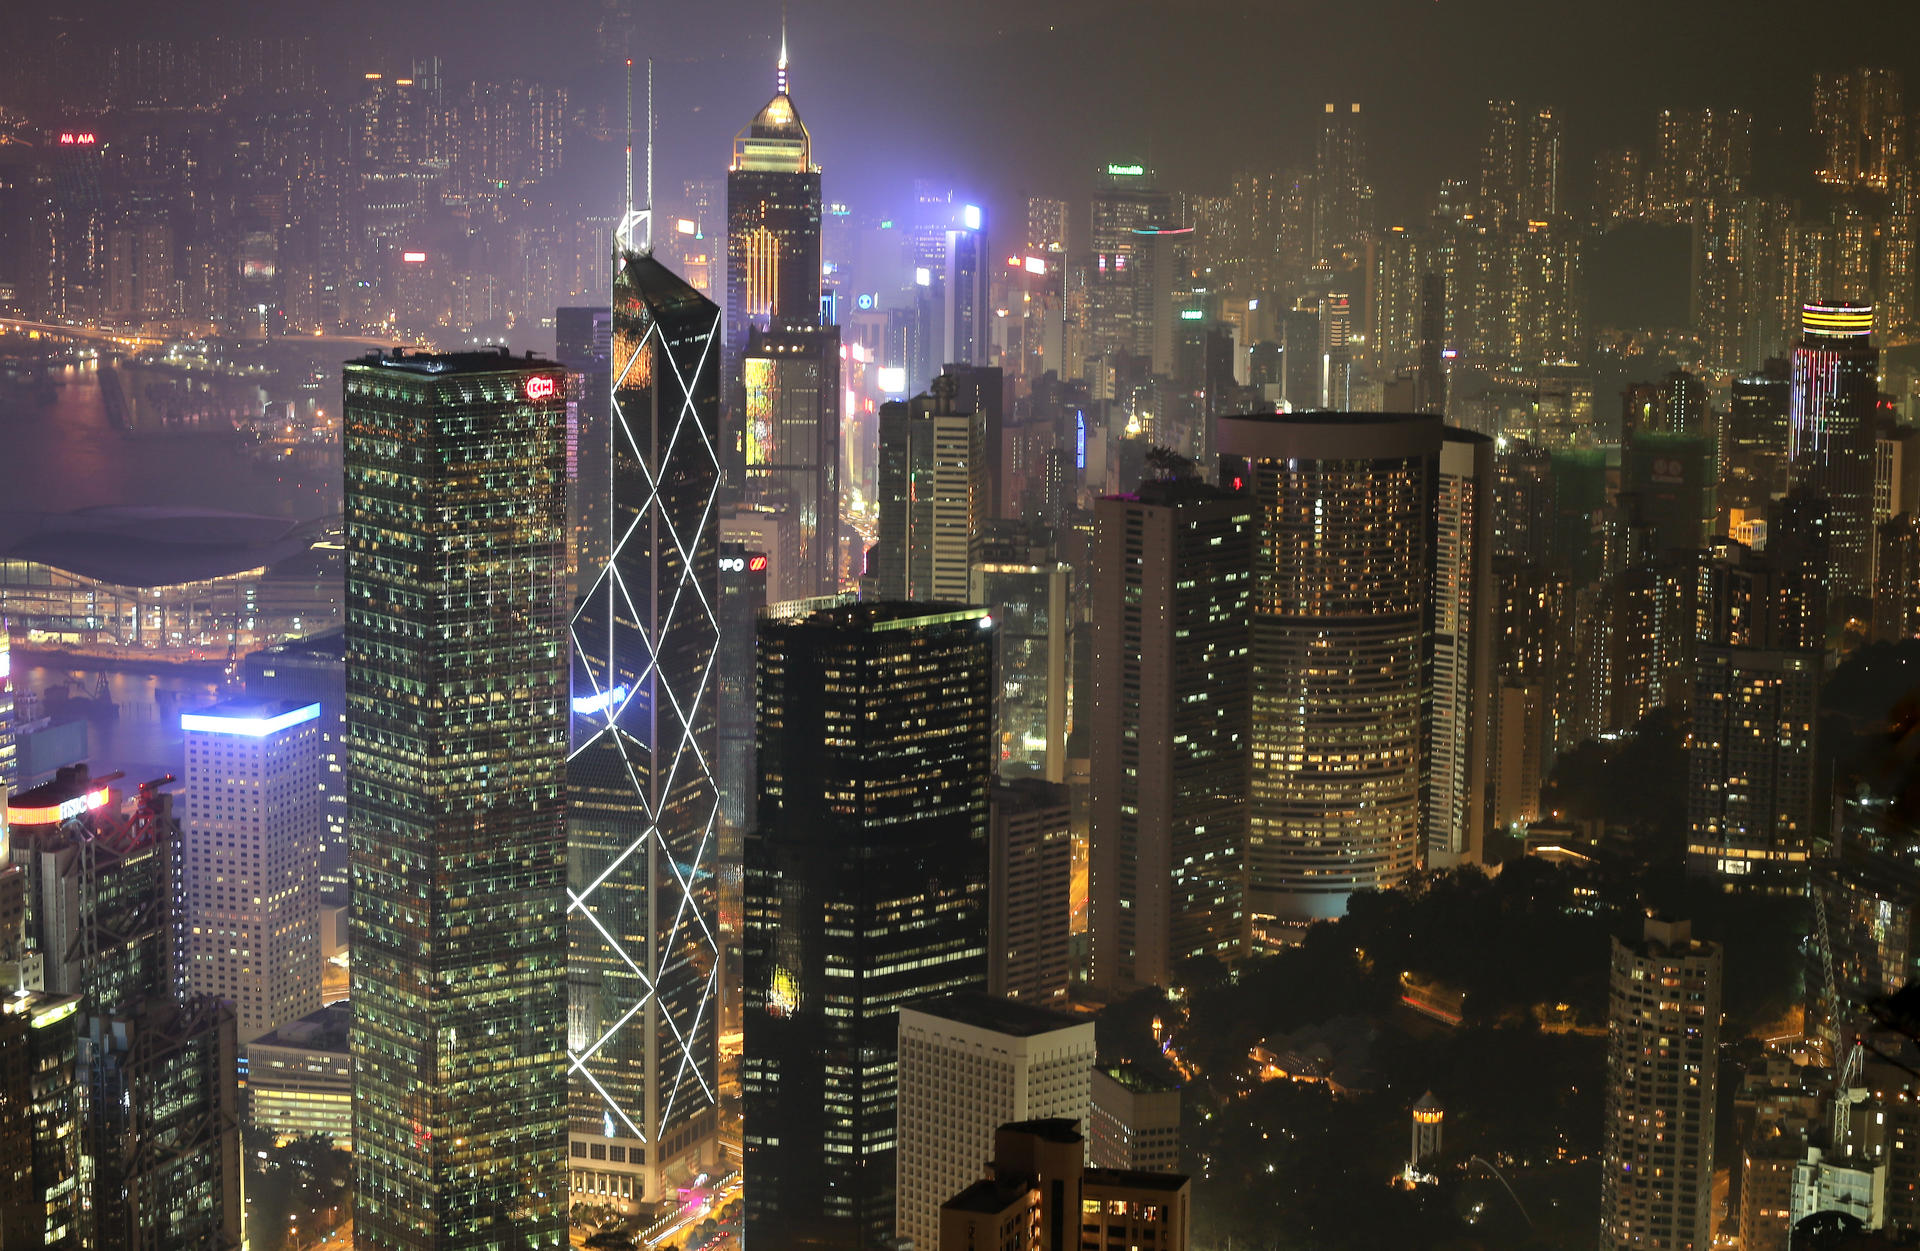 Hong Kong's iconic buildings need plenty of energy to light up the night sky. Photo: SCMP